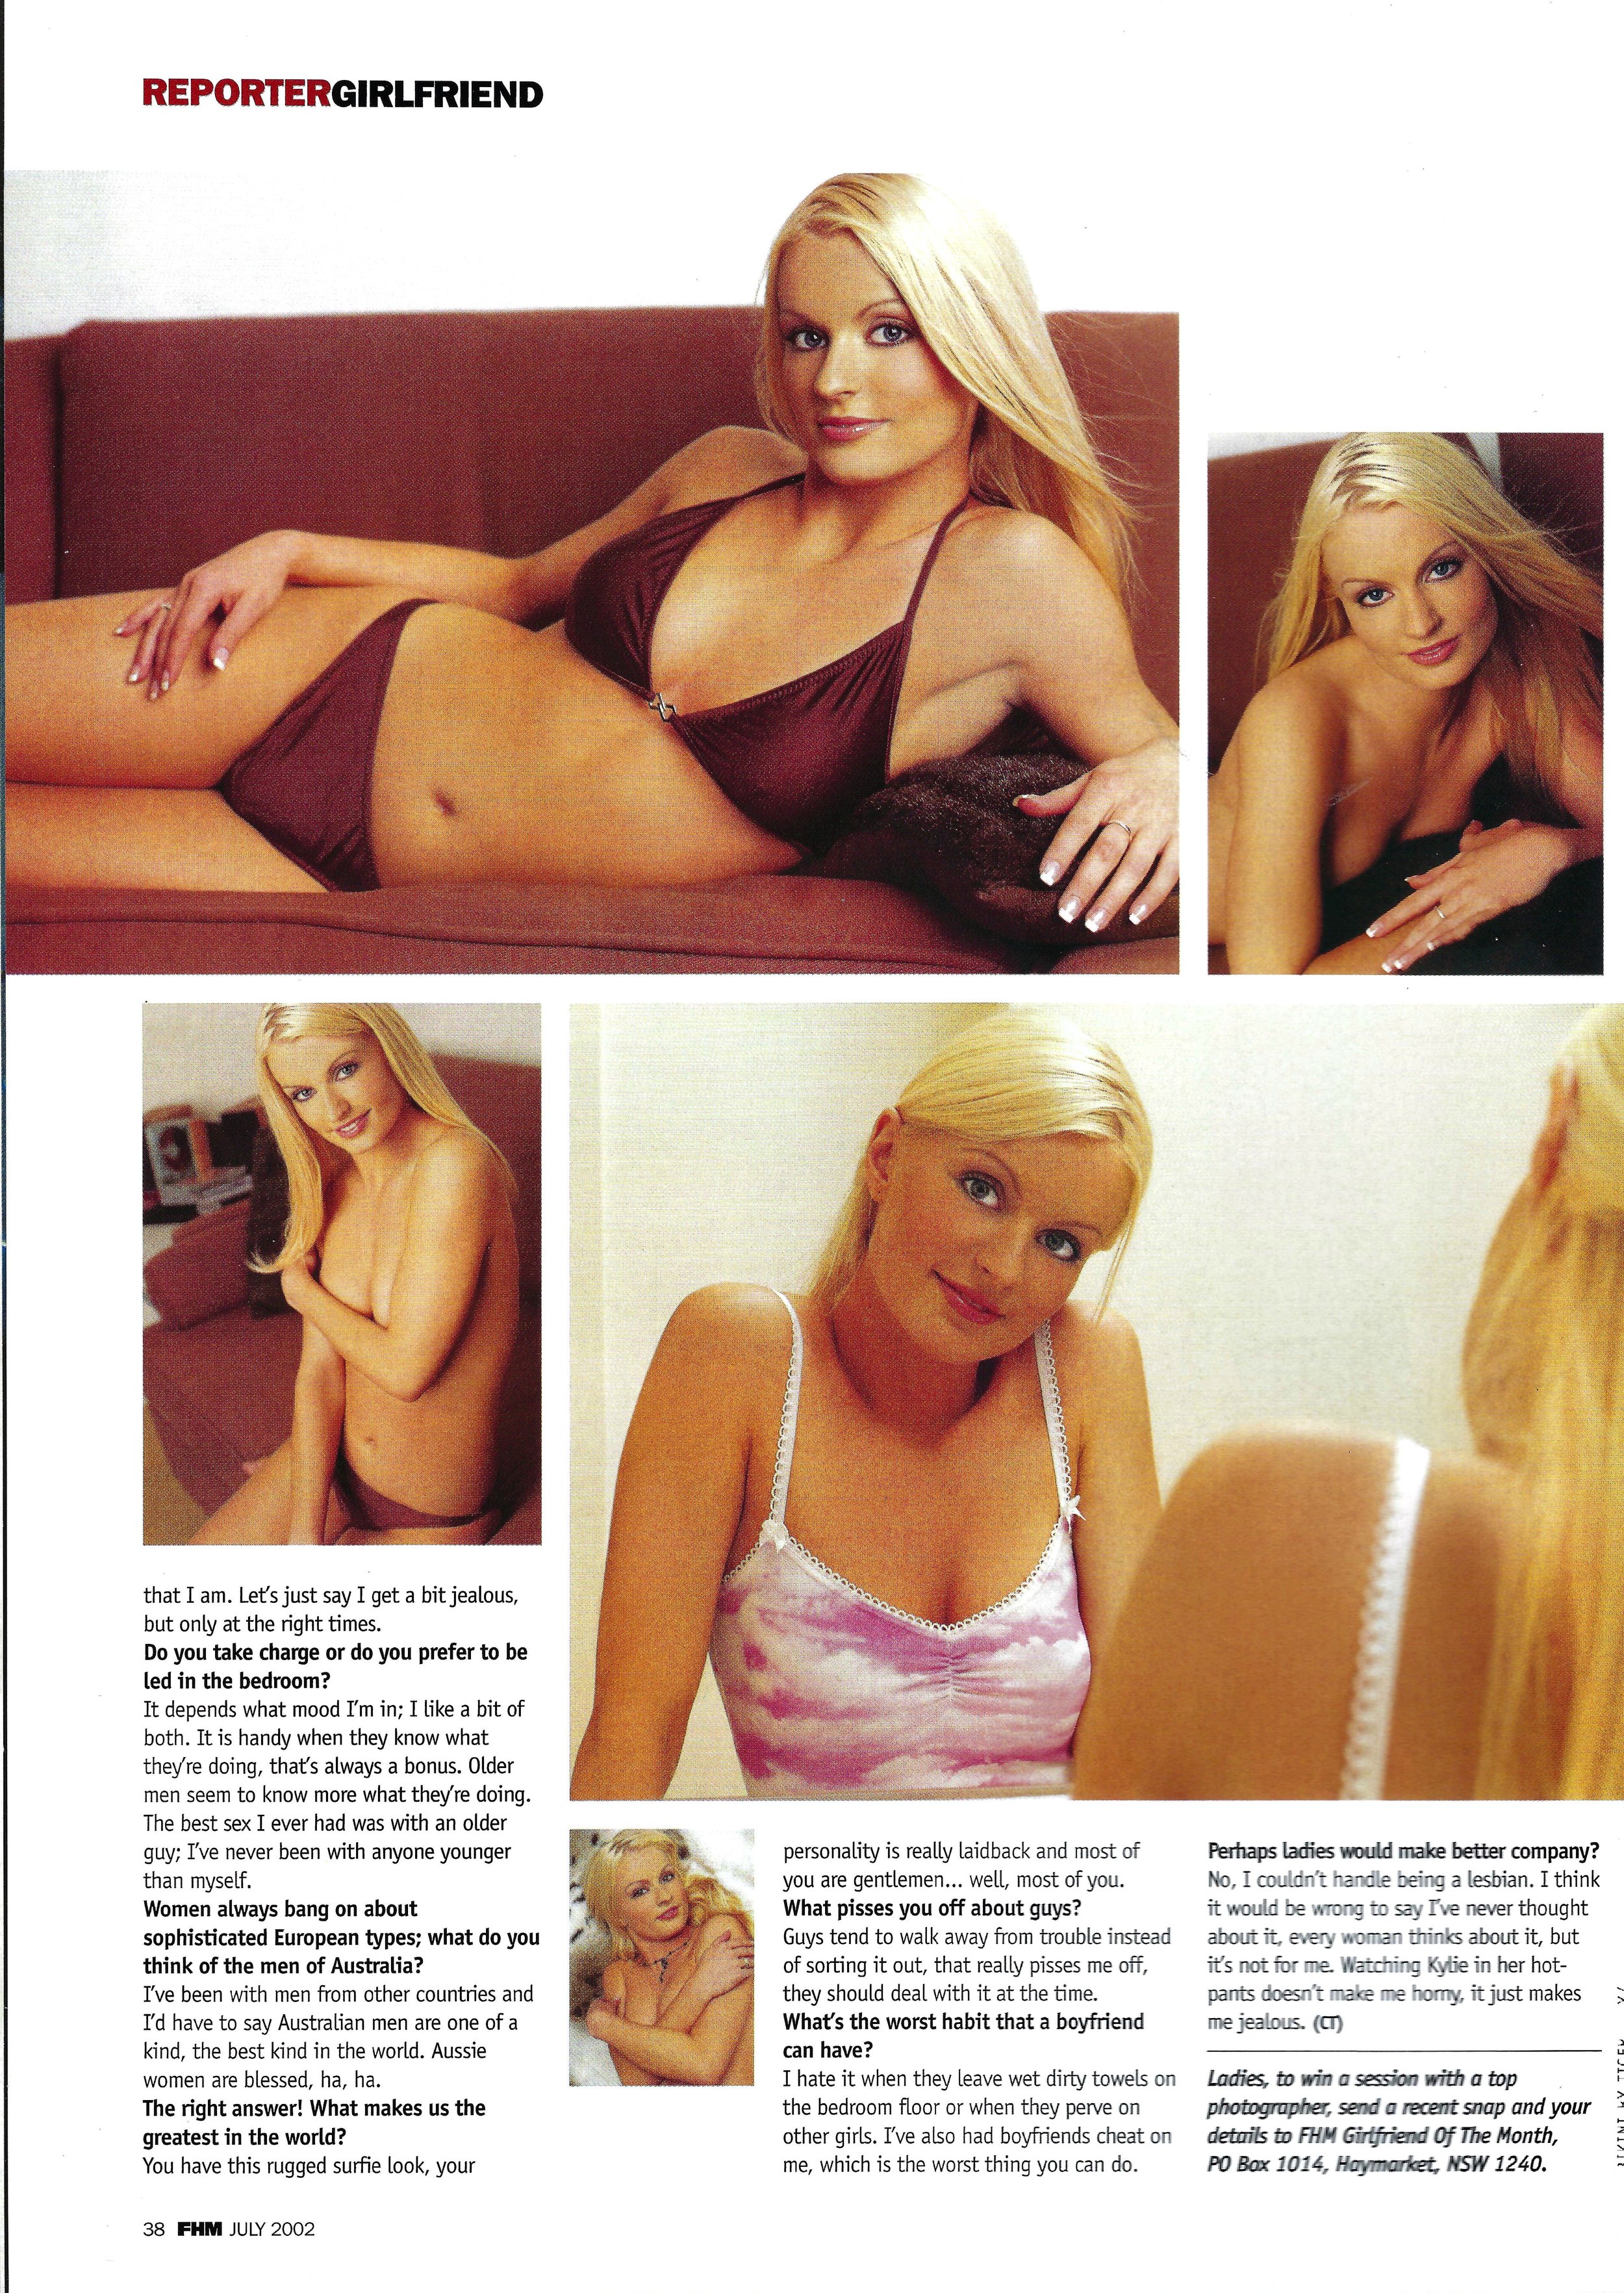 FHM Girlfriend of the Month July 2002 page 2.jpg